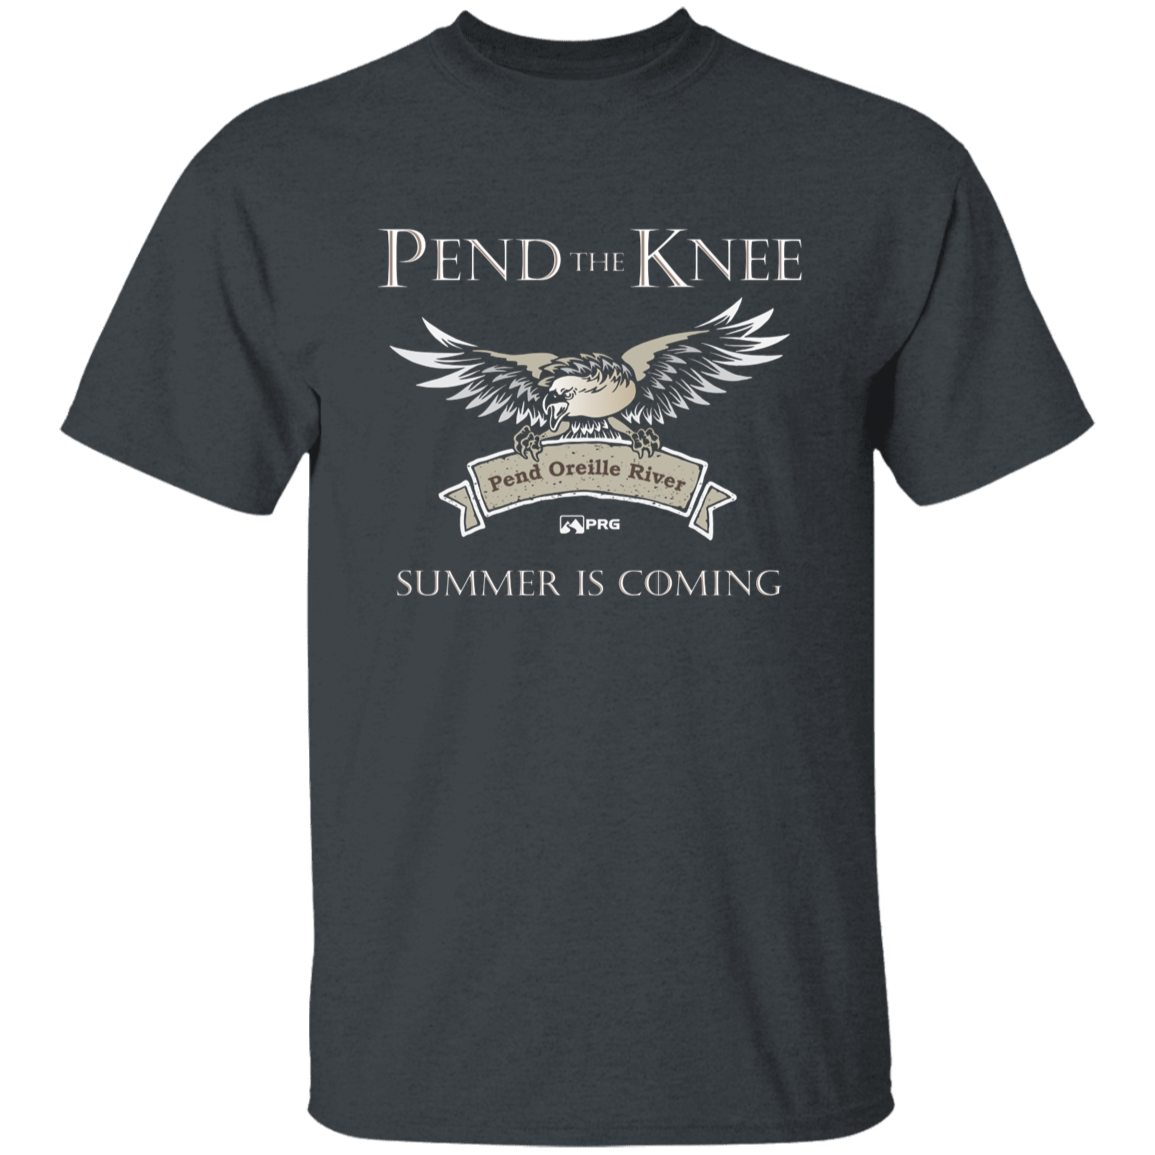 Pend the Knee - Youth Shirt